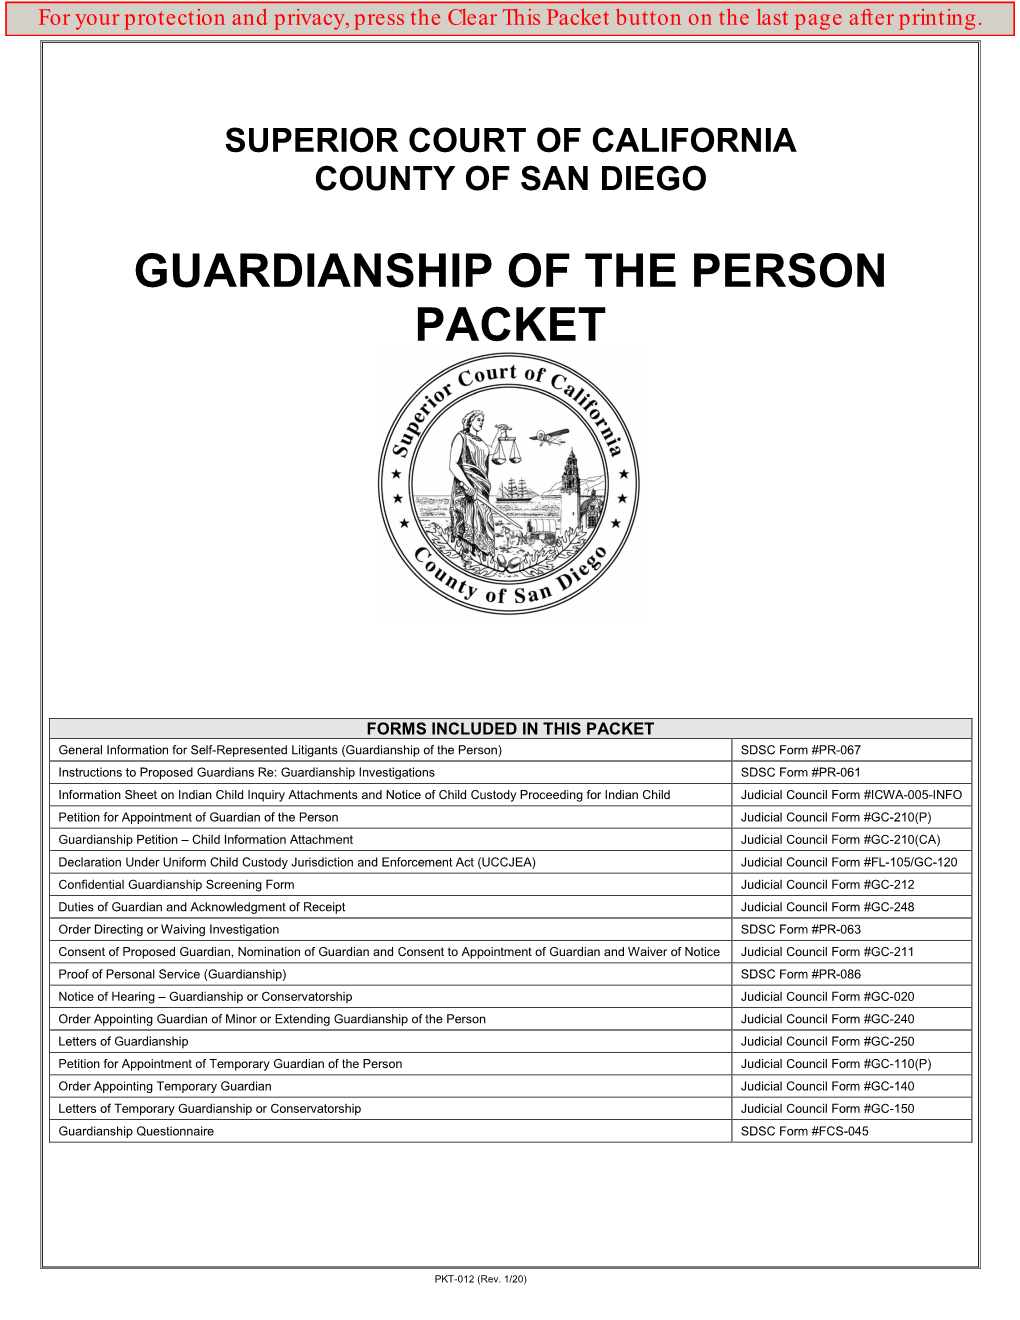 Guardianship of the Person Packet